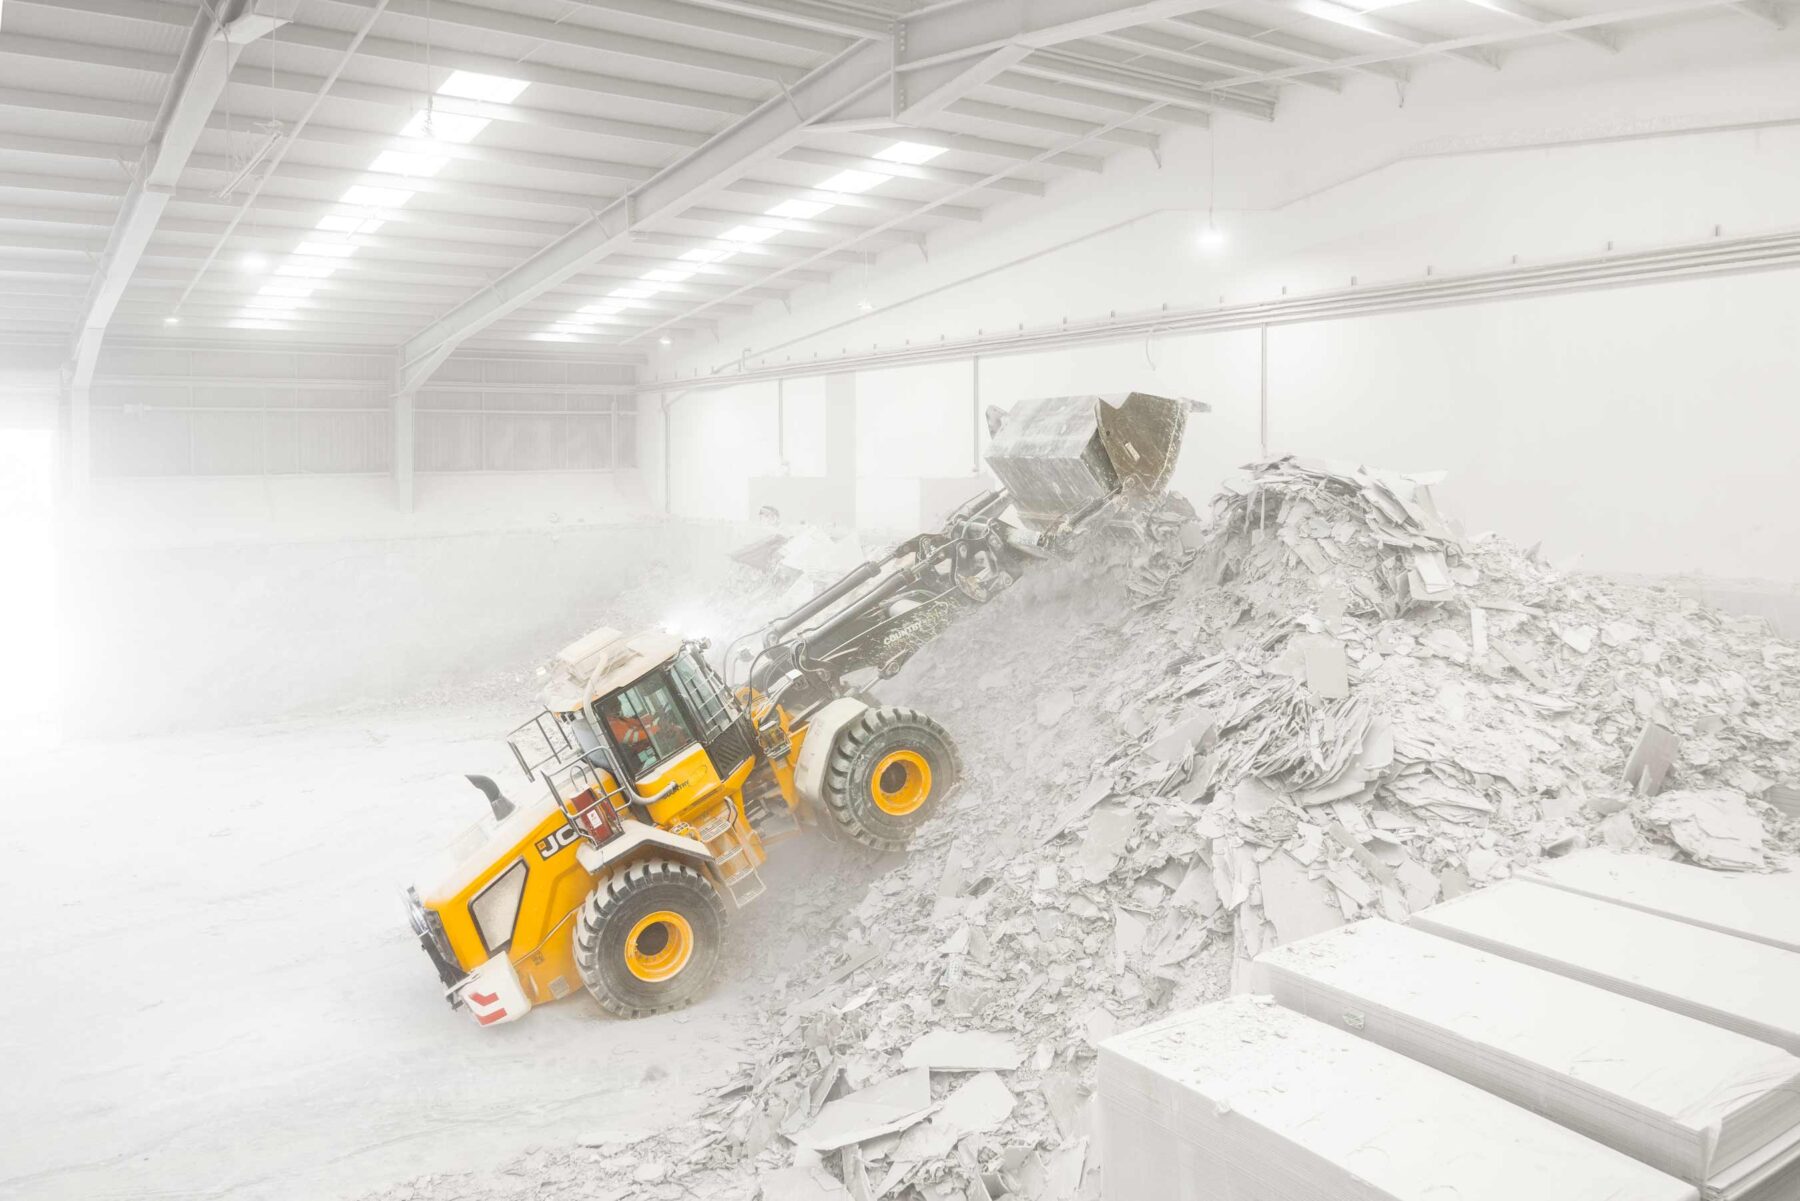 A front loader a full stretch pushes plasterboard in an industrial recycling facility to the top of a pile. It's front wheels are half way up the slope.